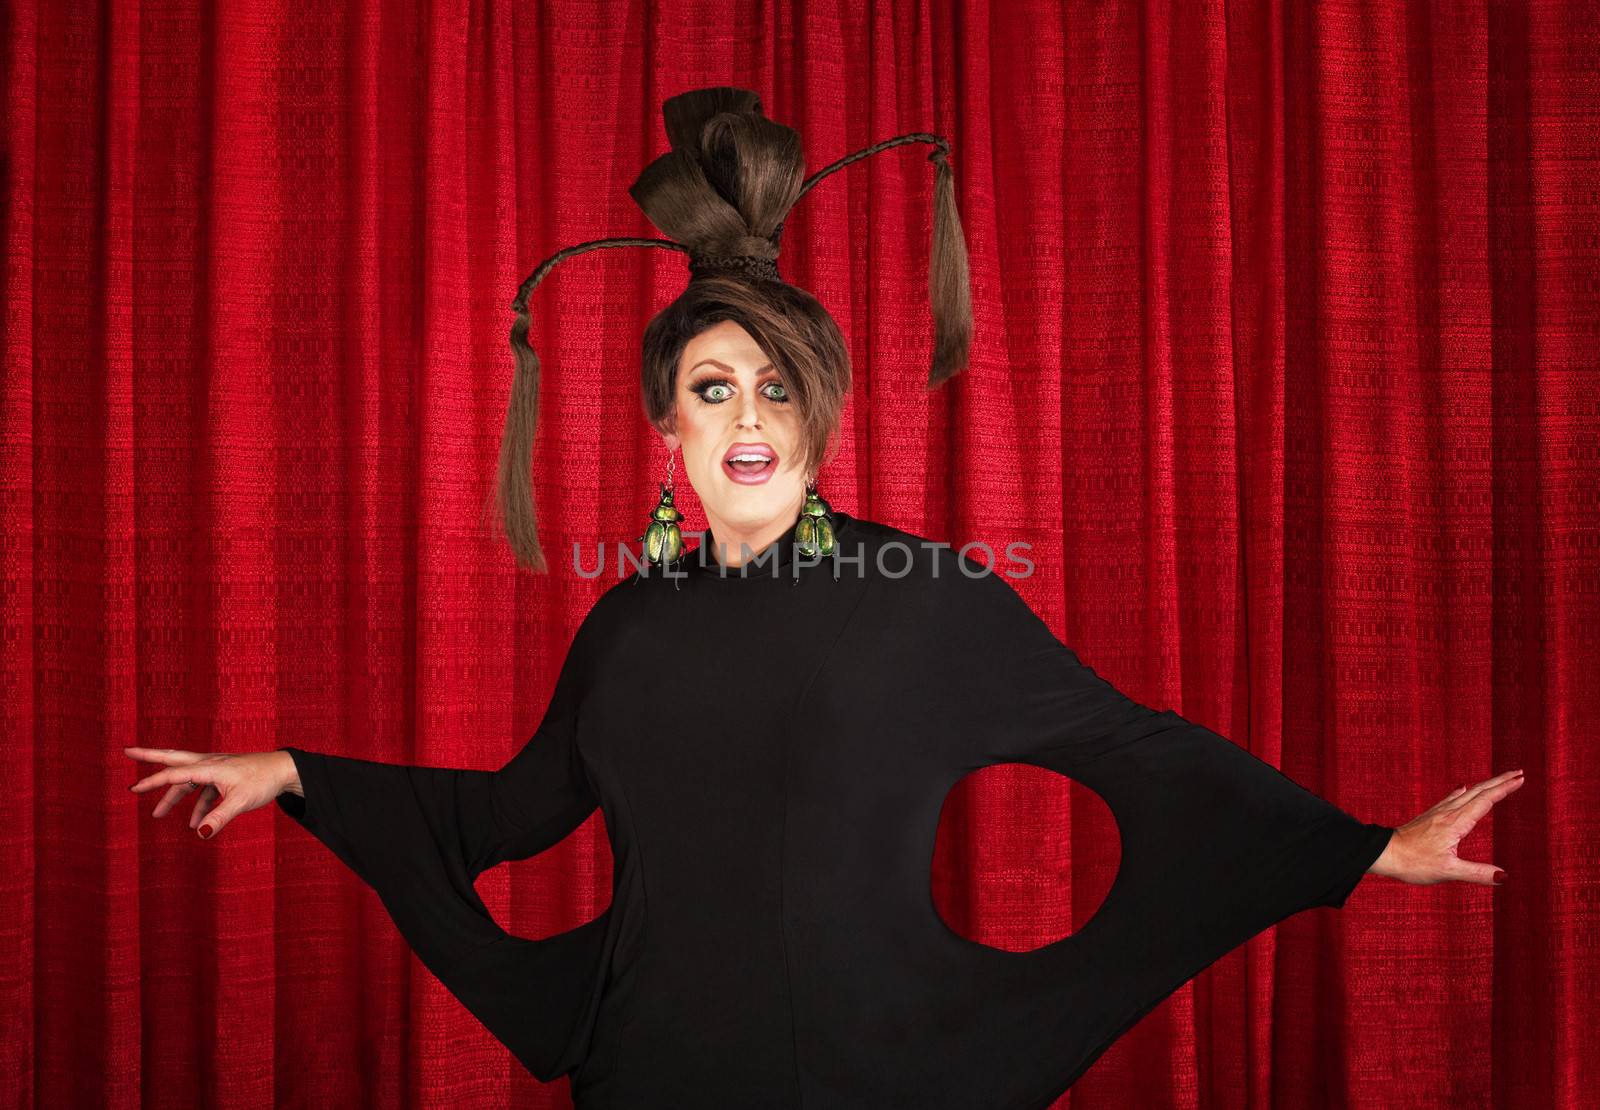 Smiling man in drag wearing unique dress and hairdo